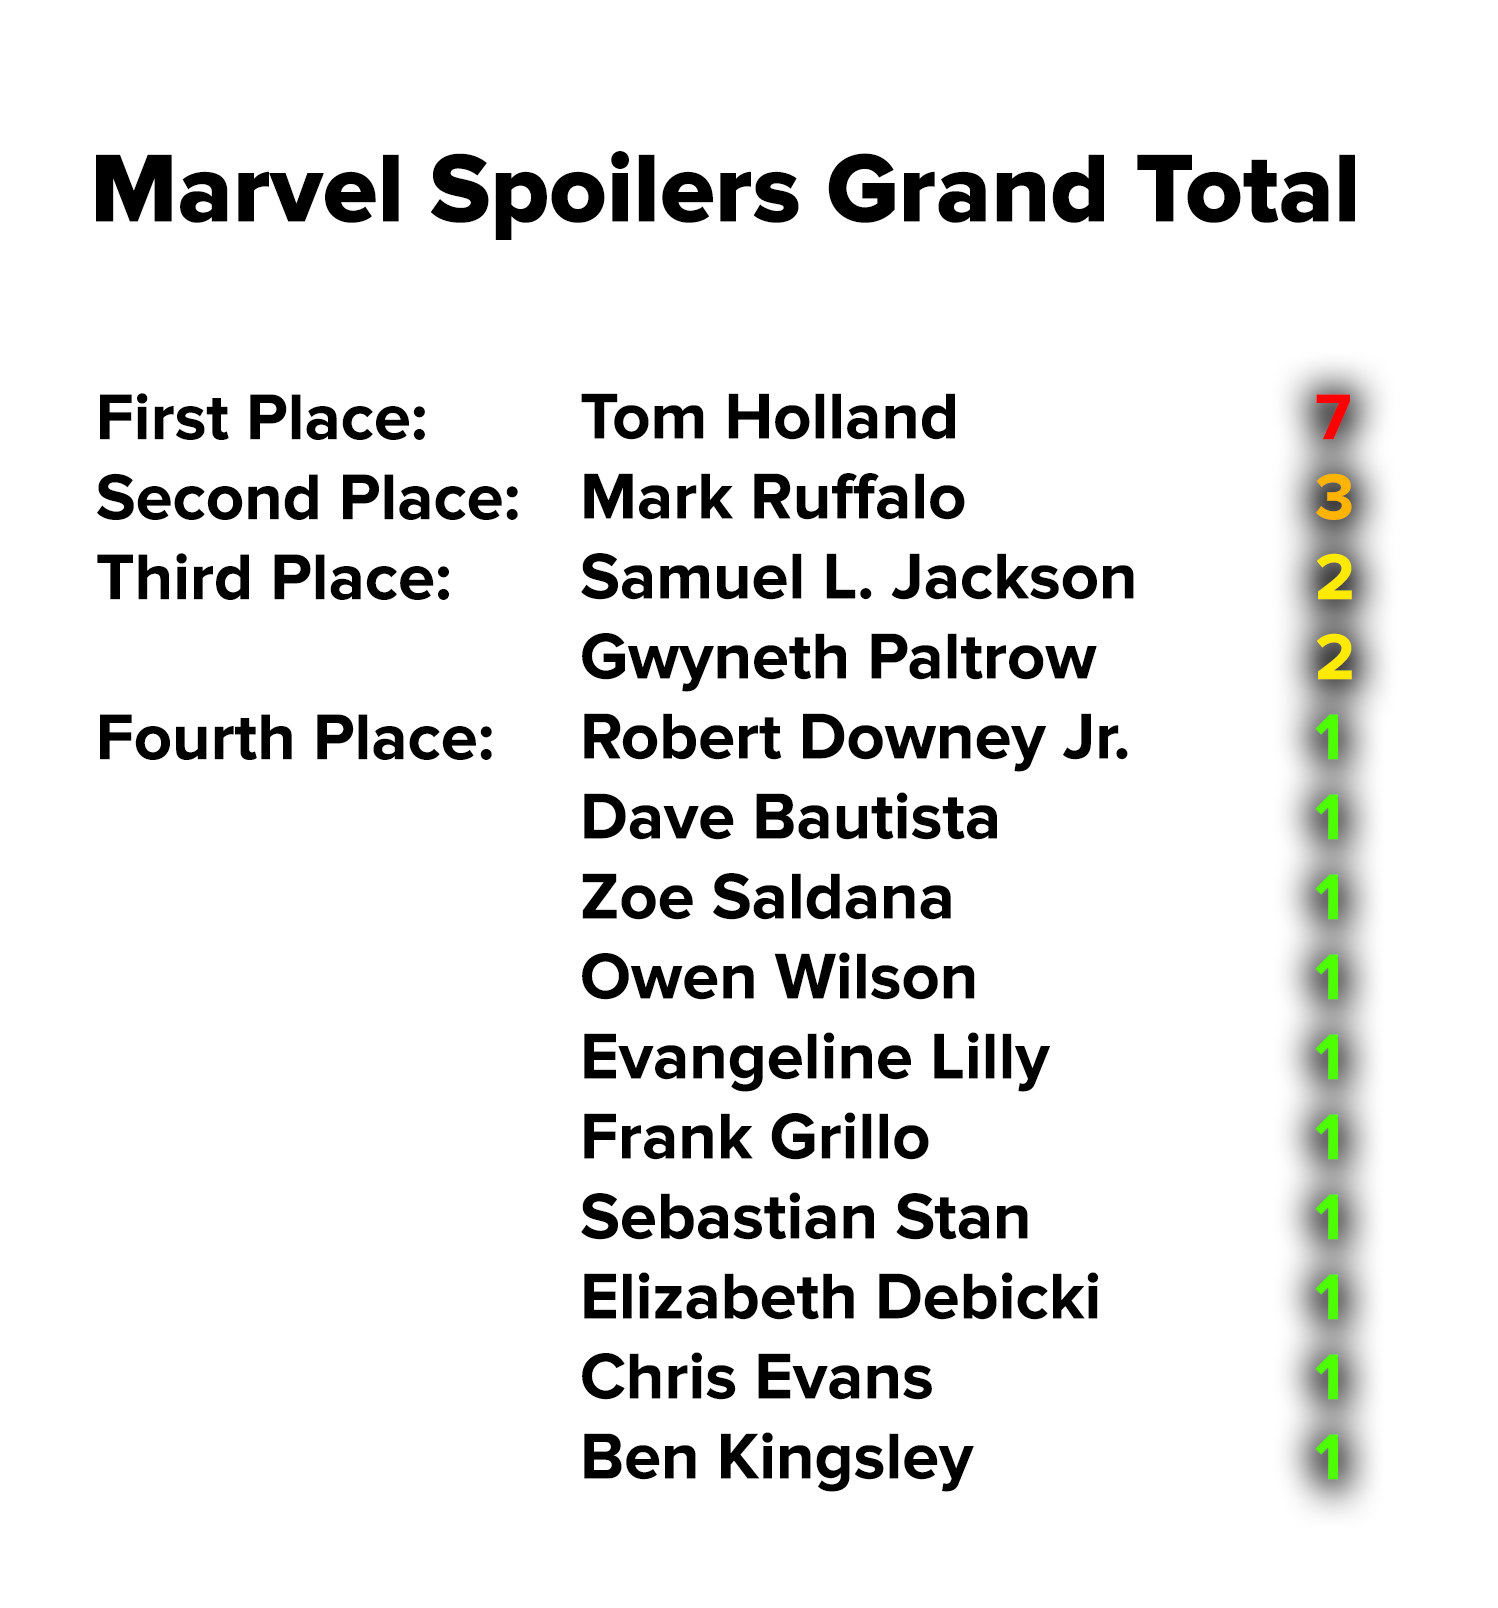 Tom Holland is in first with 7, Mark Ruffalo in second with 3, Samuel L Jackson and Gwyneth Paltrow tied for third with 2 each, and everyone else on the list has 1